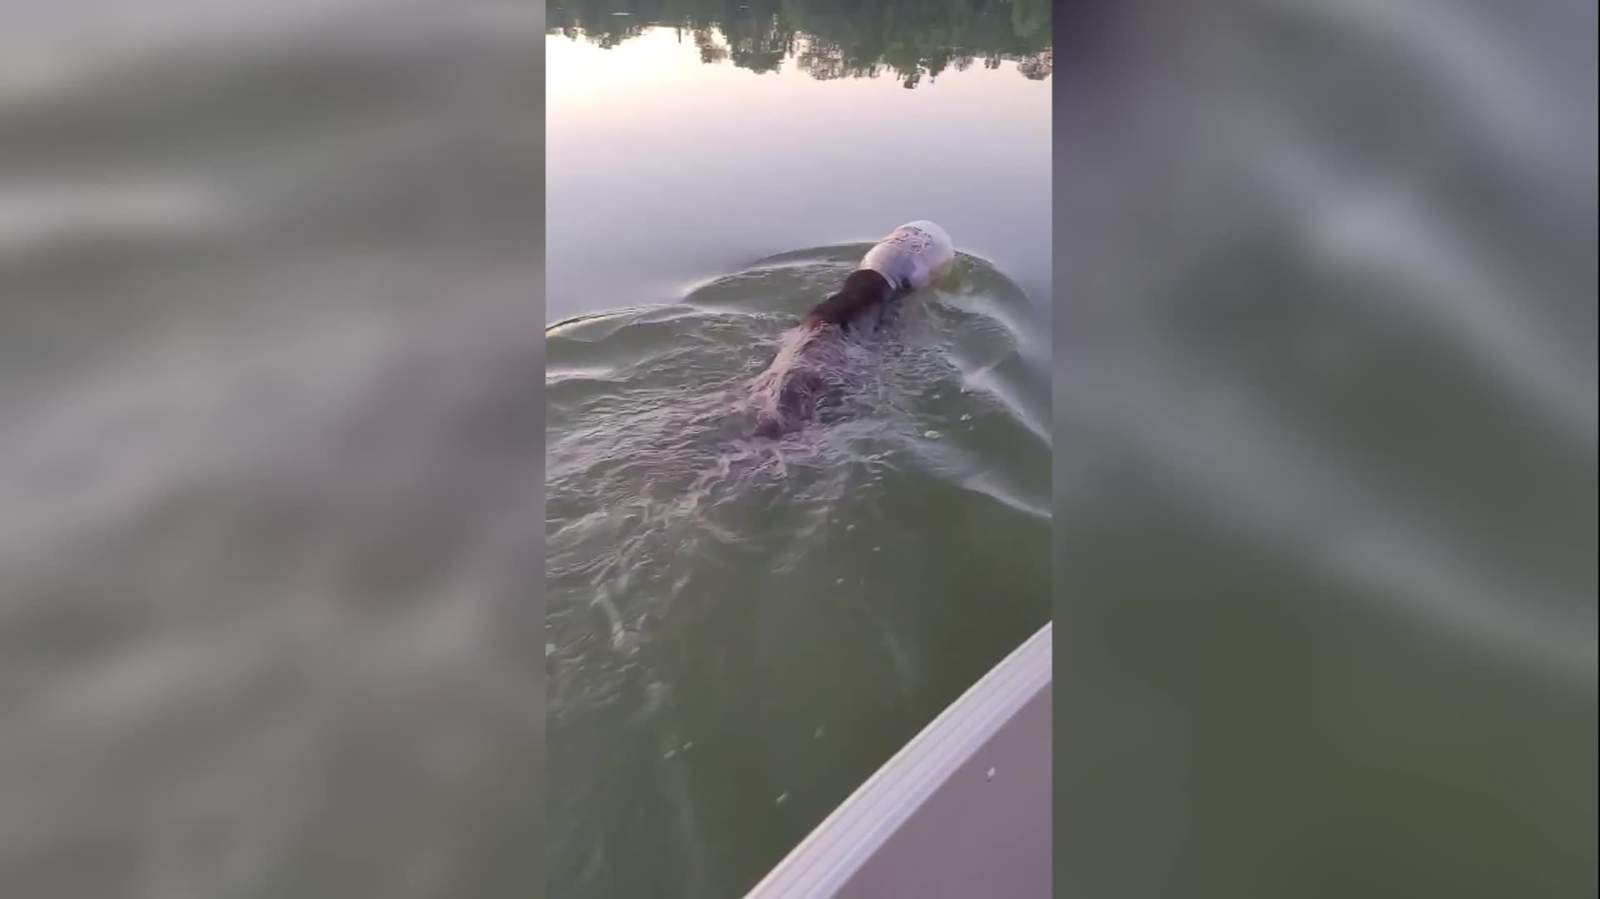 WATCH: Family rescues bear after it was found swimming with a plastic tub on its head